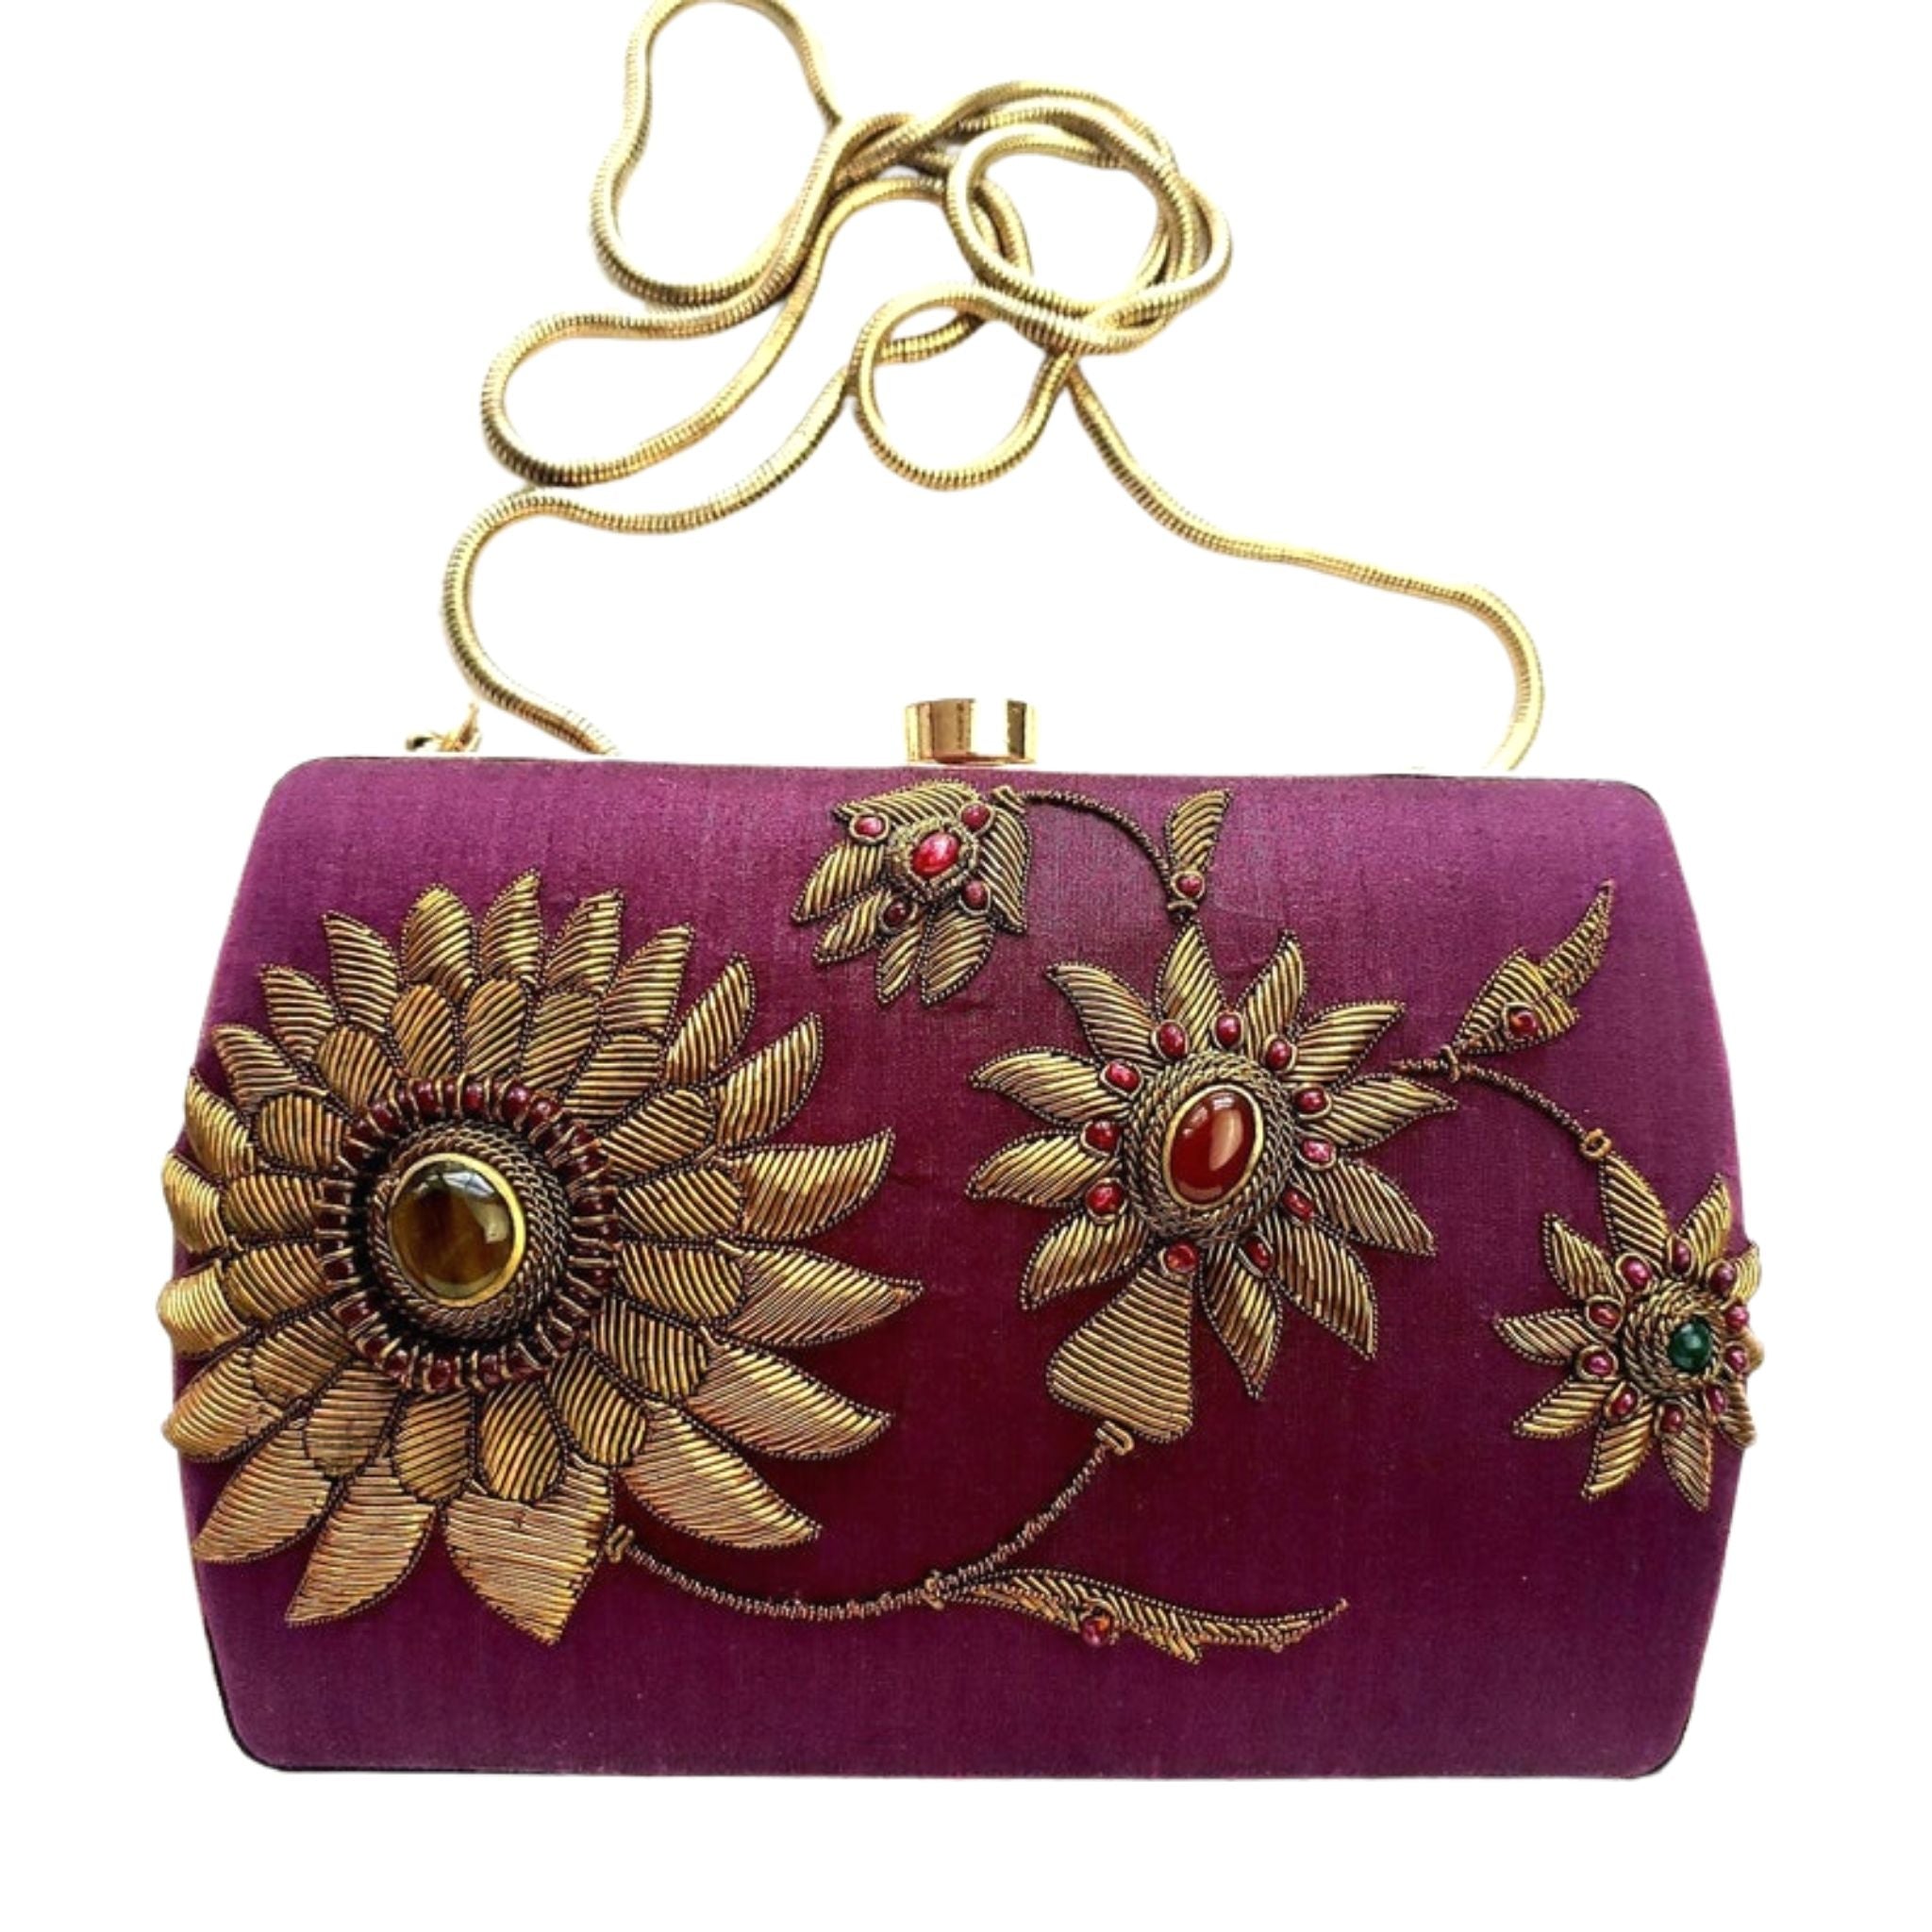 Indha Handcrafted Maroon Brocade Clutch Purse| Red Dupion Silk Clutch Purse  | Indian Wedding Theme Hand Embroidered | Wedding Accessory | Gifting |  Gifts For Her | Festive Purse | Clutch Purse|